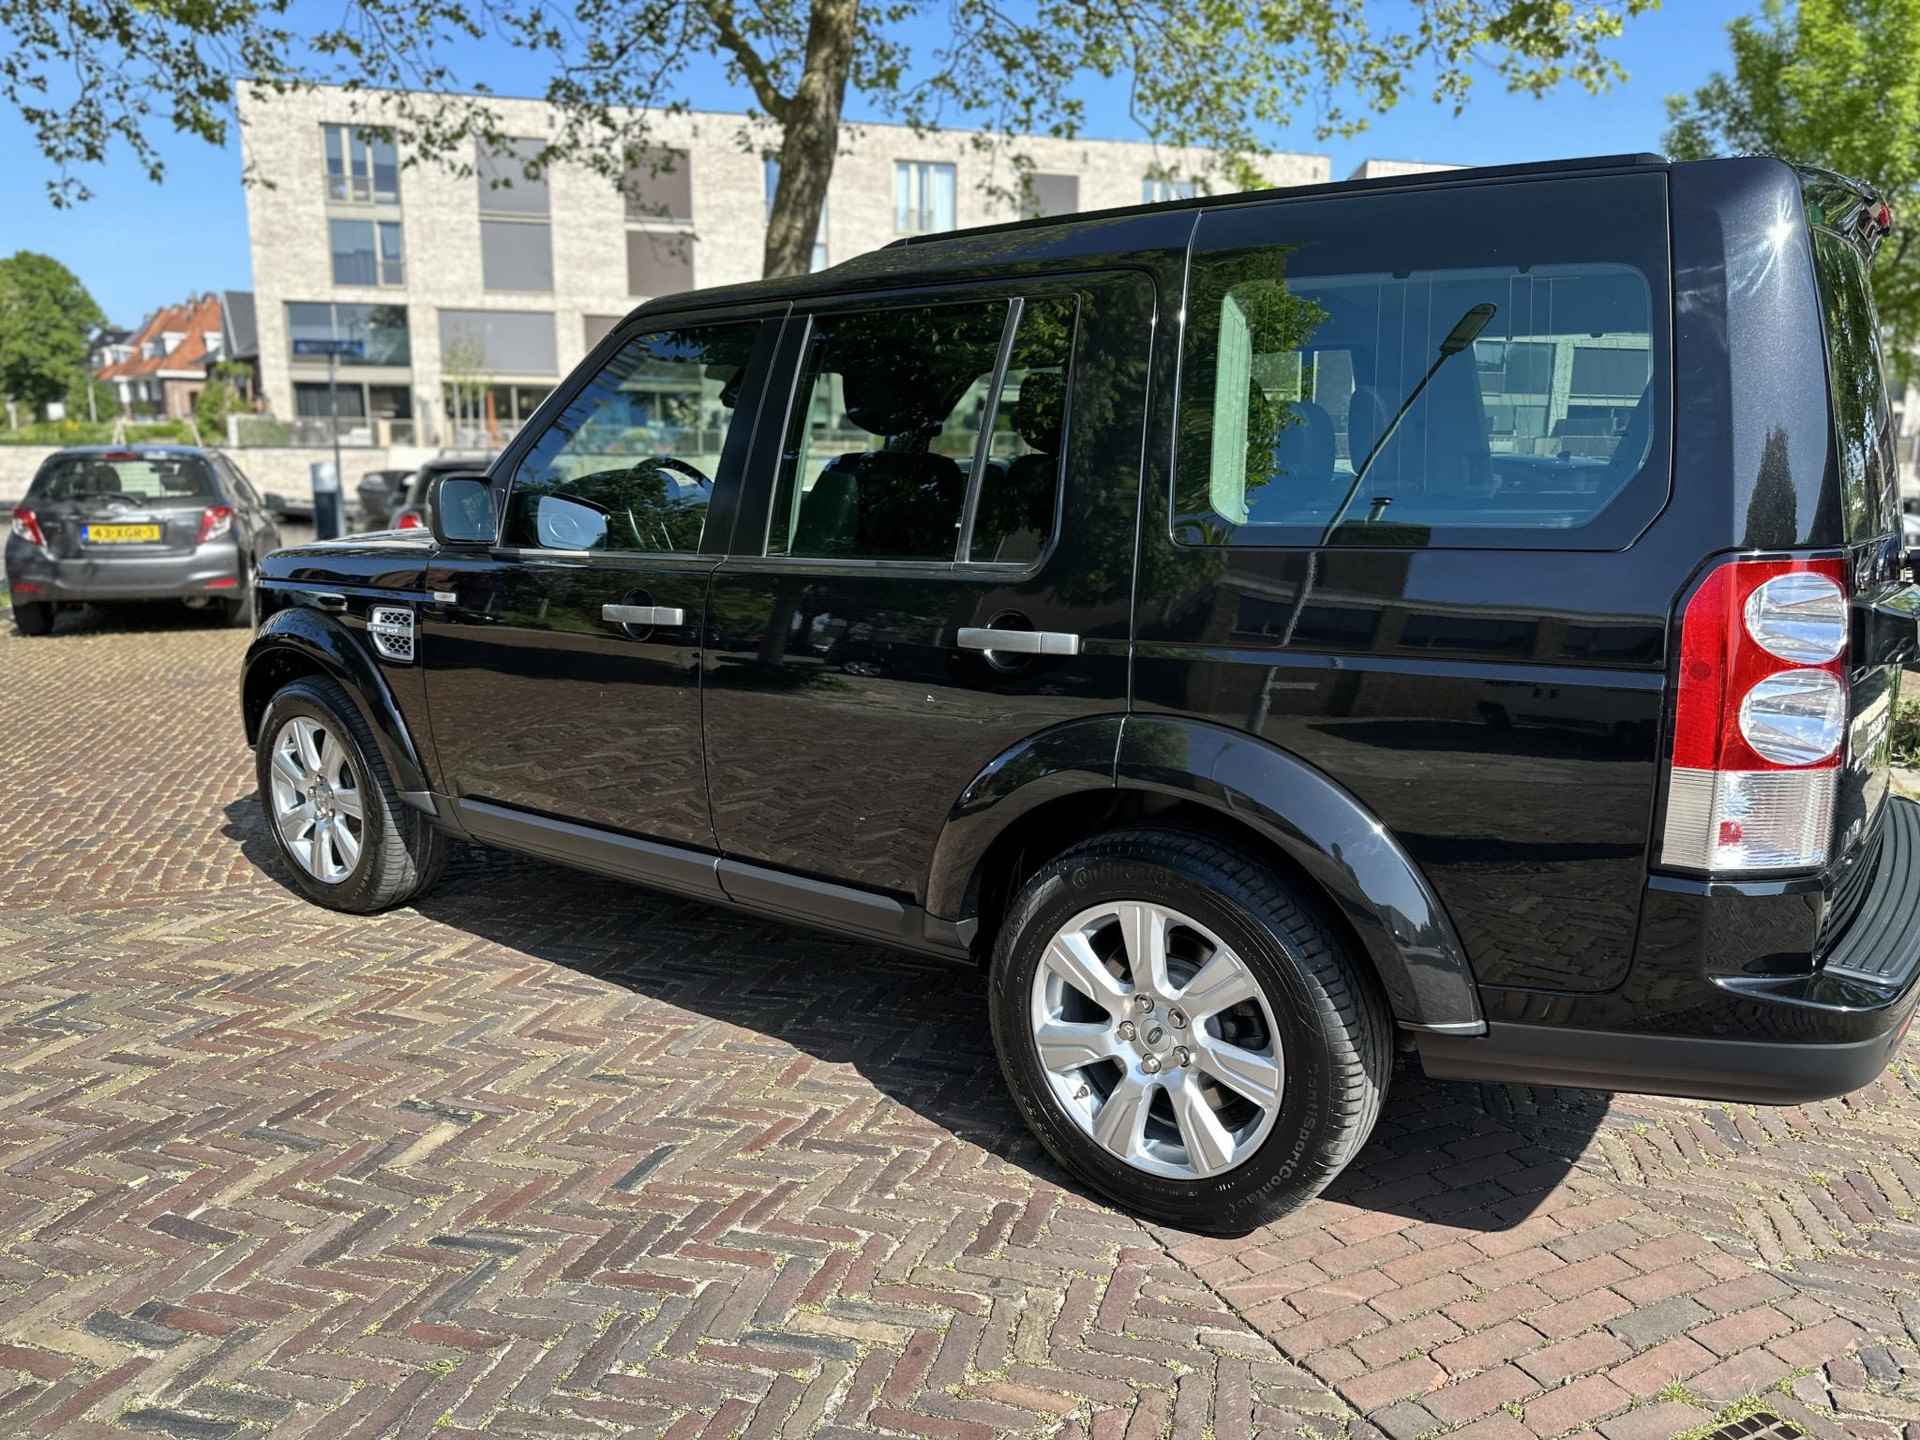 Land Rover Discovery 5.0 V8 HSE 5.0 Hse - 9/16